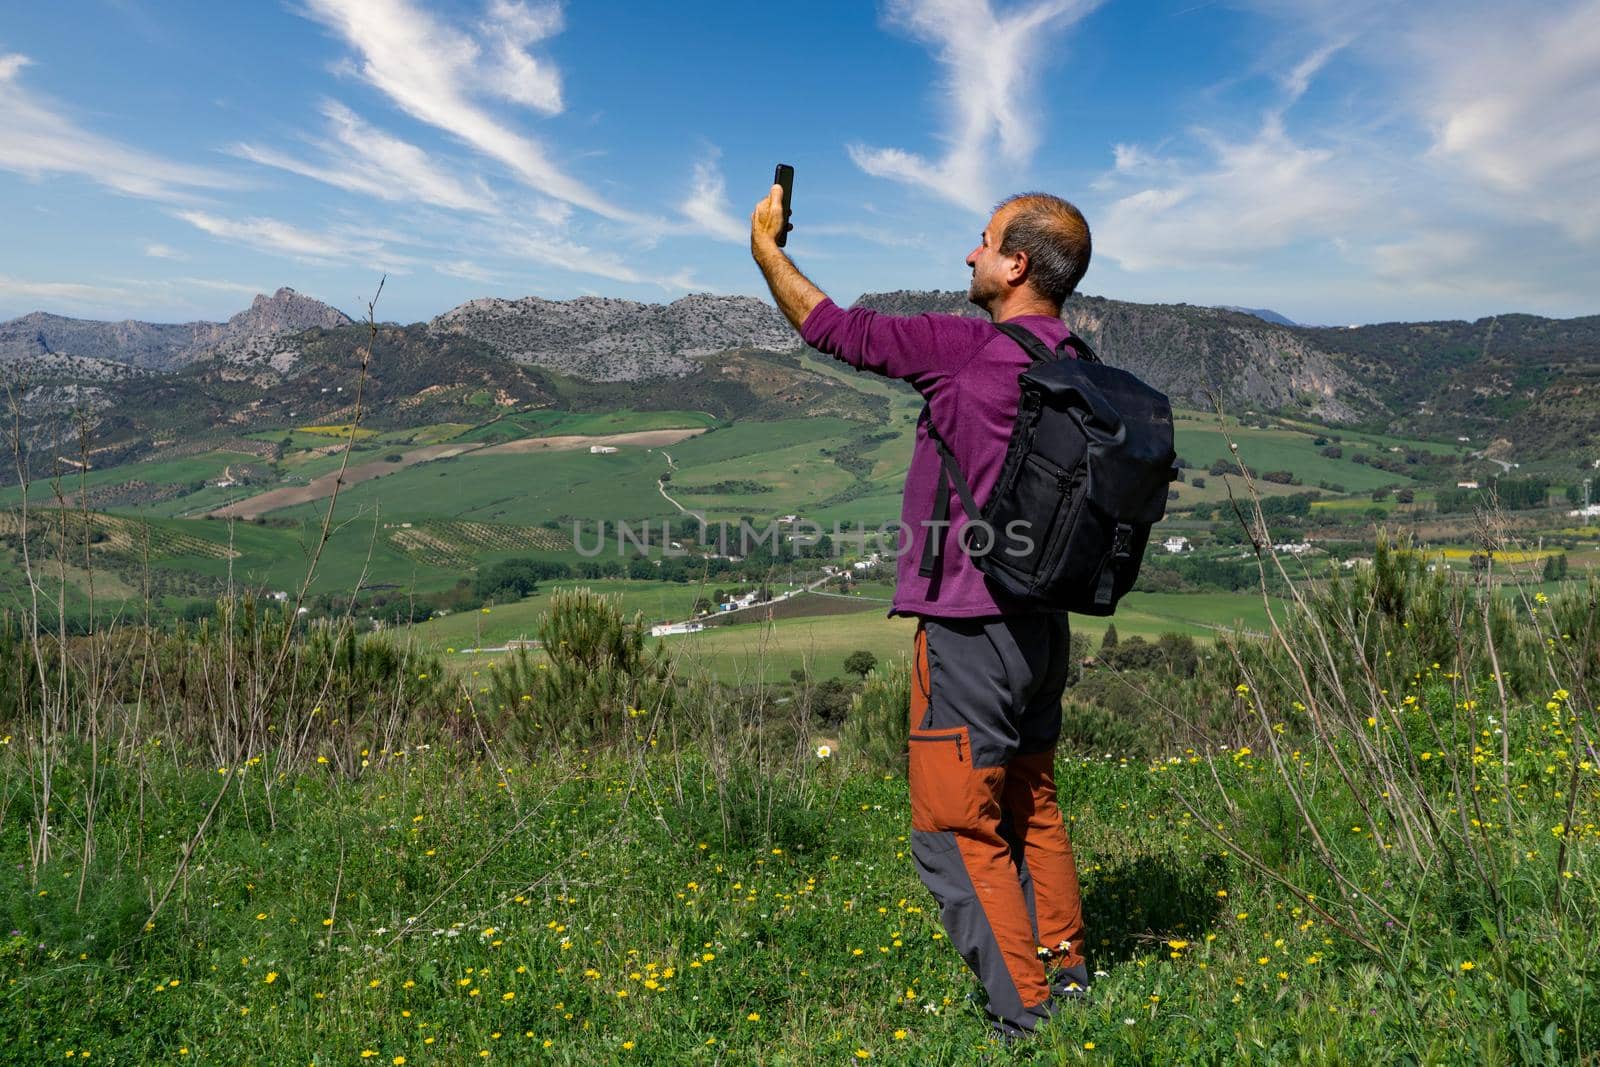 lost man looking for coverage on his cell phone in the mountains to orient himself mountainous landscape in the background and cloudy sky